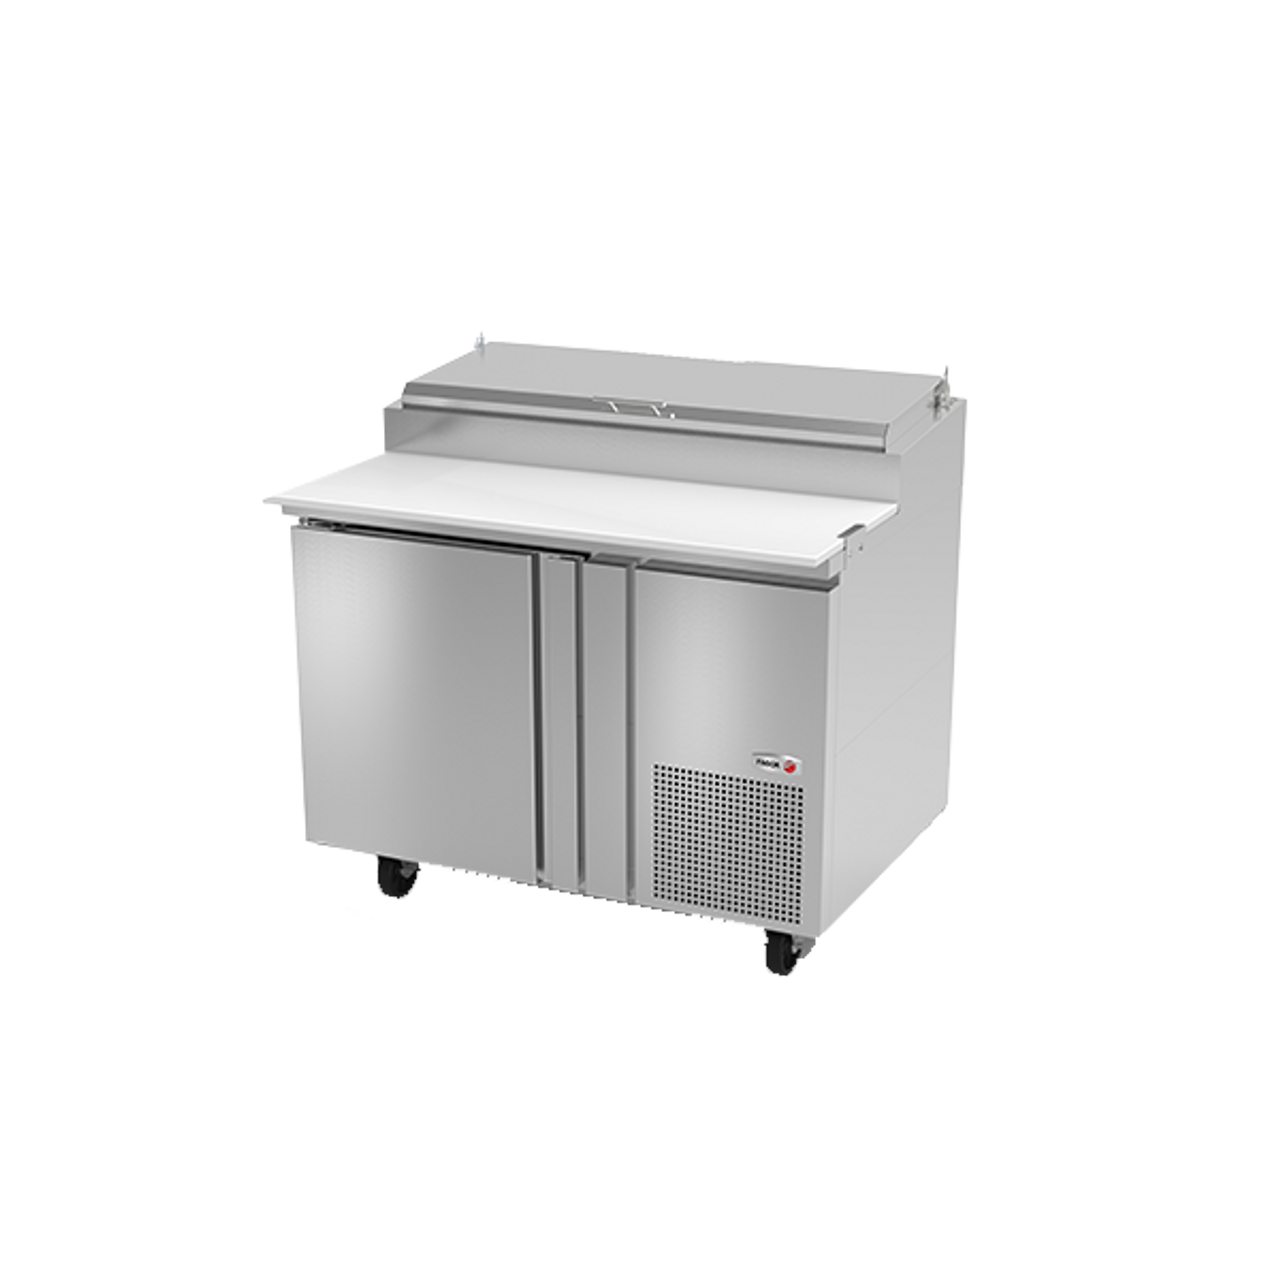 Refrigerated Pizza Prep Table, 46"W, 9.9 cu.ft. capacity, one-section, (1) self closing door with 120° stay open feature, (6) 1/3 size top pan capacity, (2) shelves, stainless steel insulated lid, 19" removable & reversible white polyethylene cutting board, self-contained refrigeration, 5" castors front 2 with brakes, stainless steel interior & exterior, 1/4 hp, cETL, UL, NSF 7, Made in North America